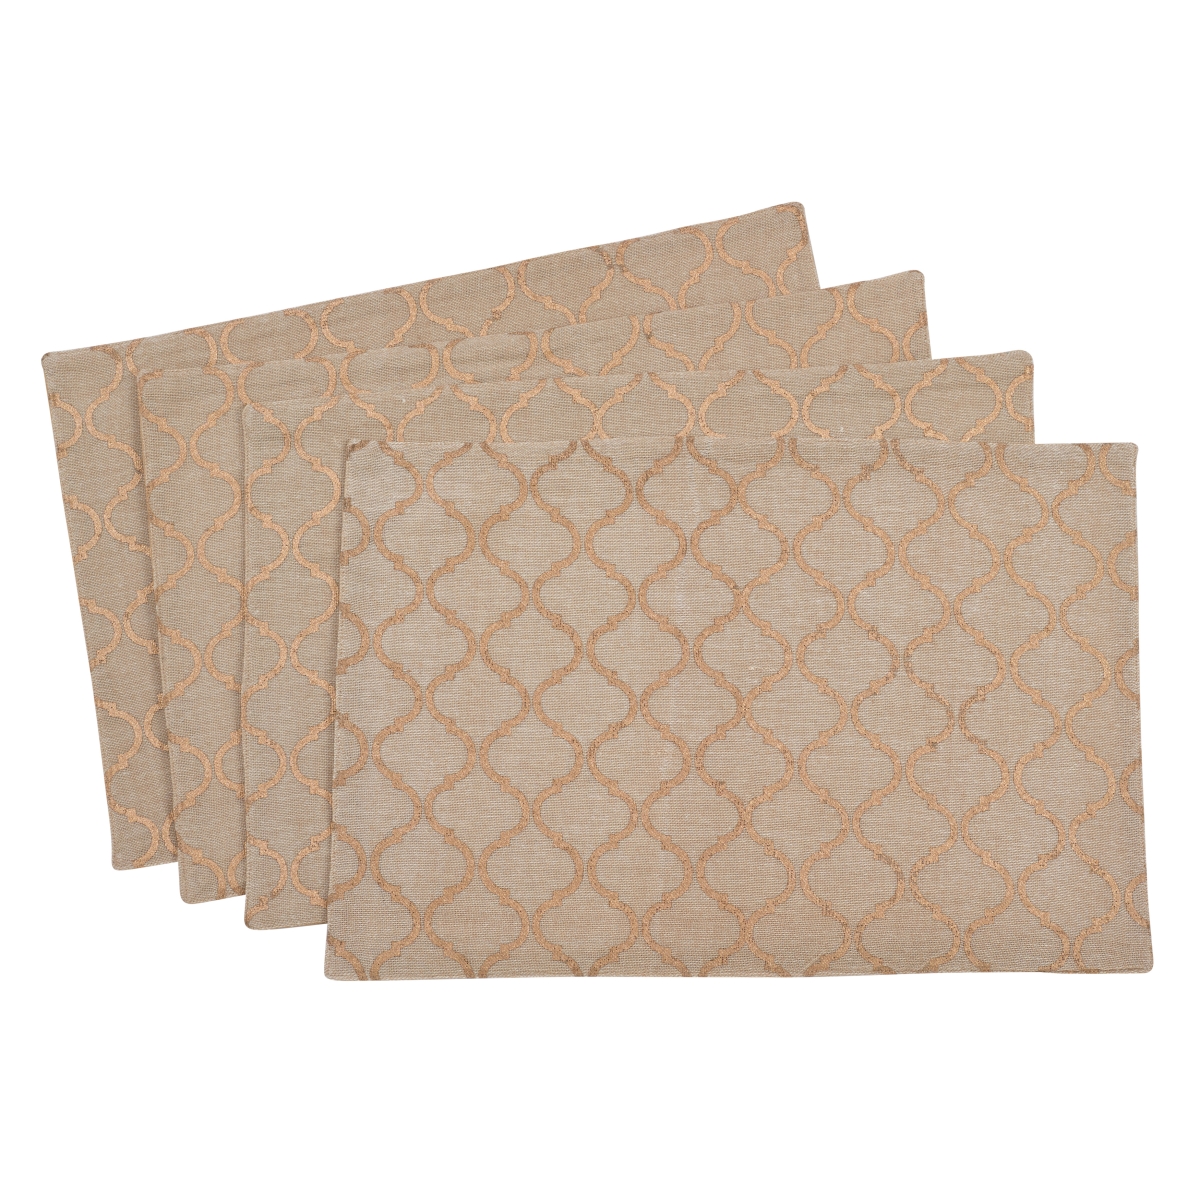 10787.n1319b 13 X 19 In. Oblong Printed Design Placemats Set, Natural - 4 Piece